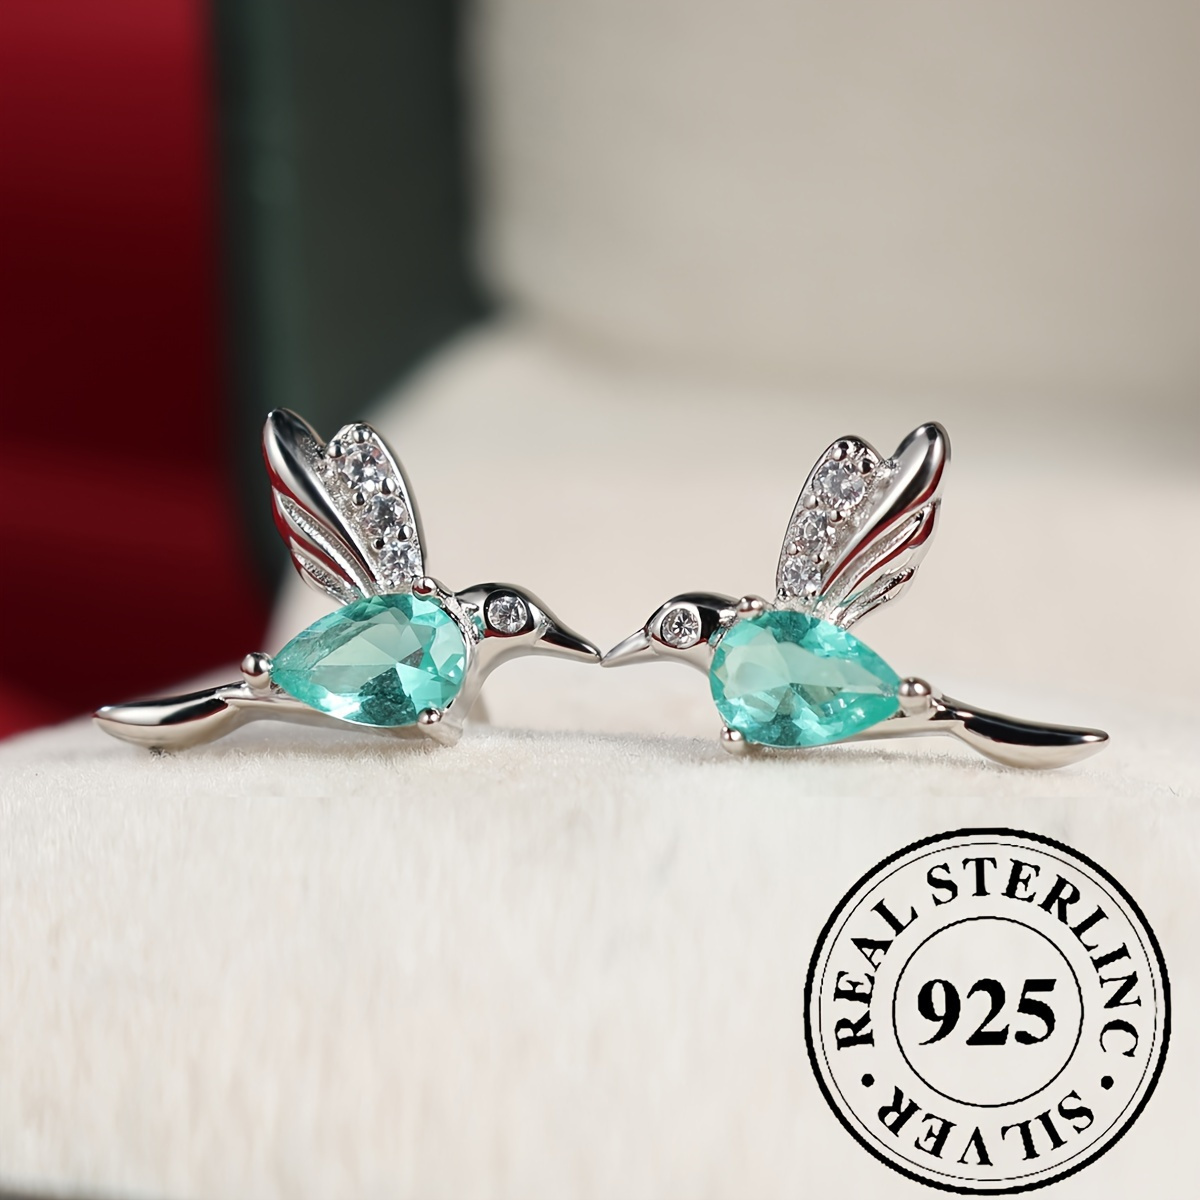 

Exquisite Hummingbird Shaped Stud Earrings, 925 Sterling Silver, Hypoallergenic Jewelry, Zircon Inlaid, Elegant Bohemian Style, Pretty Female Gift, Supports 925 Silver Testing